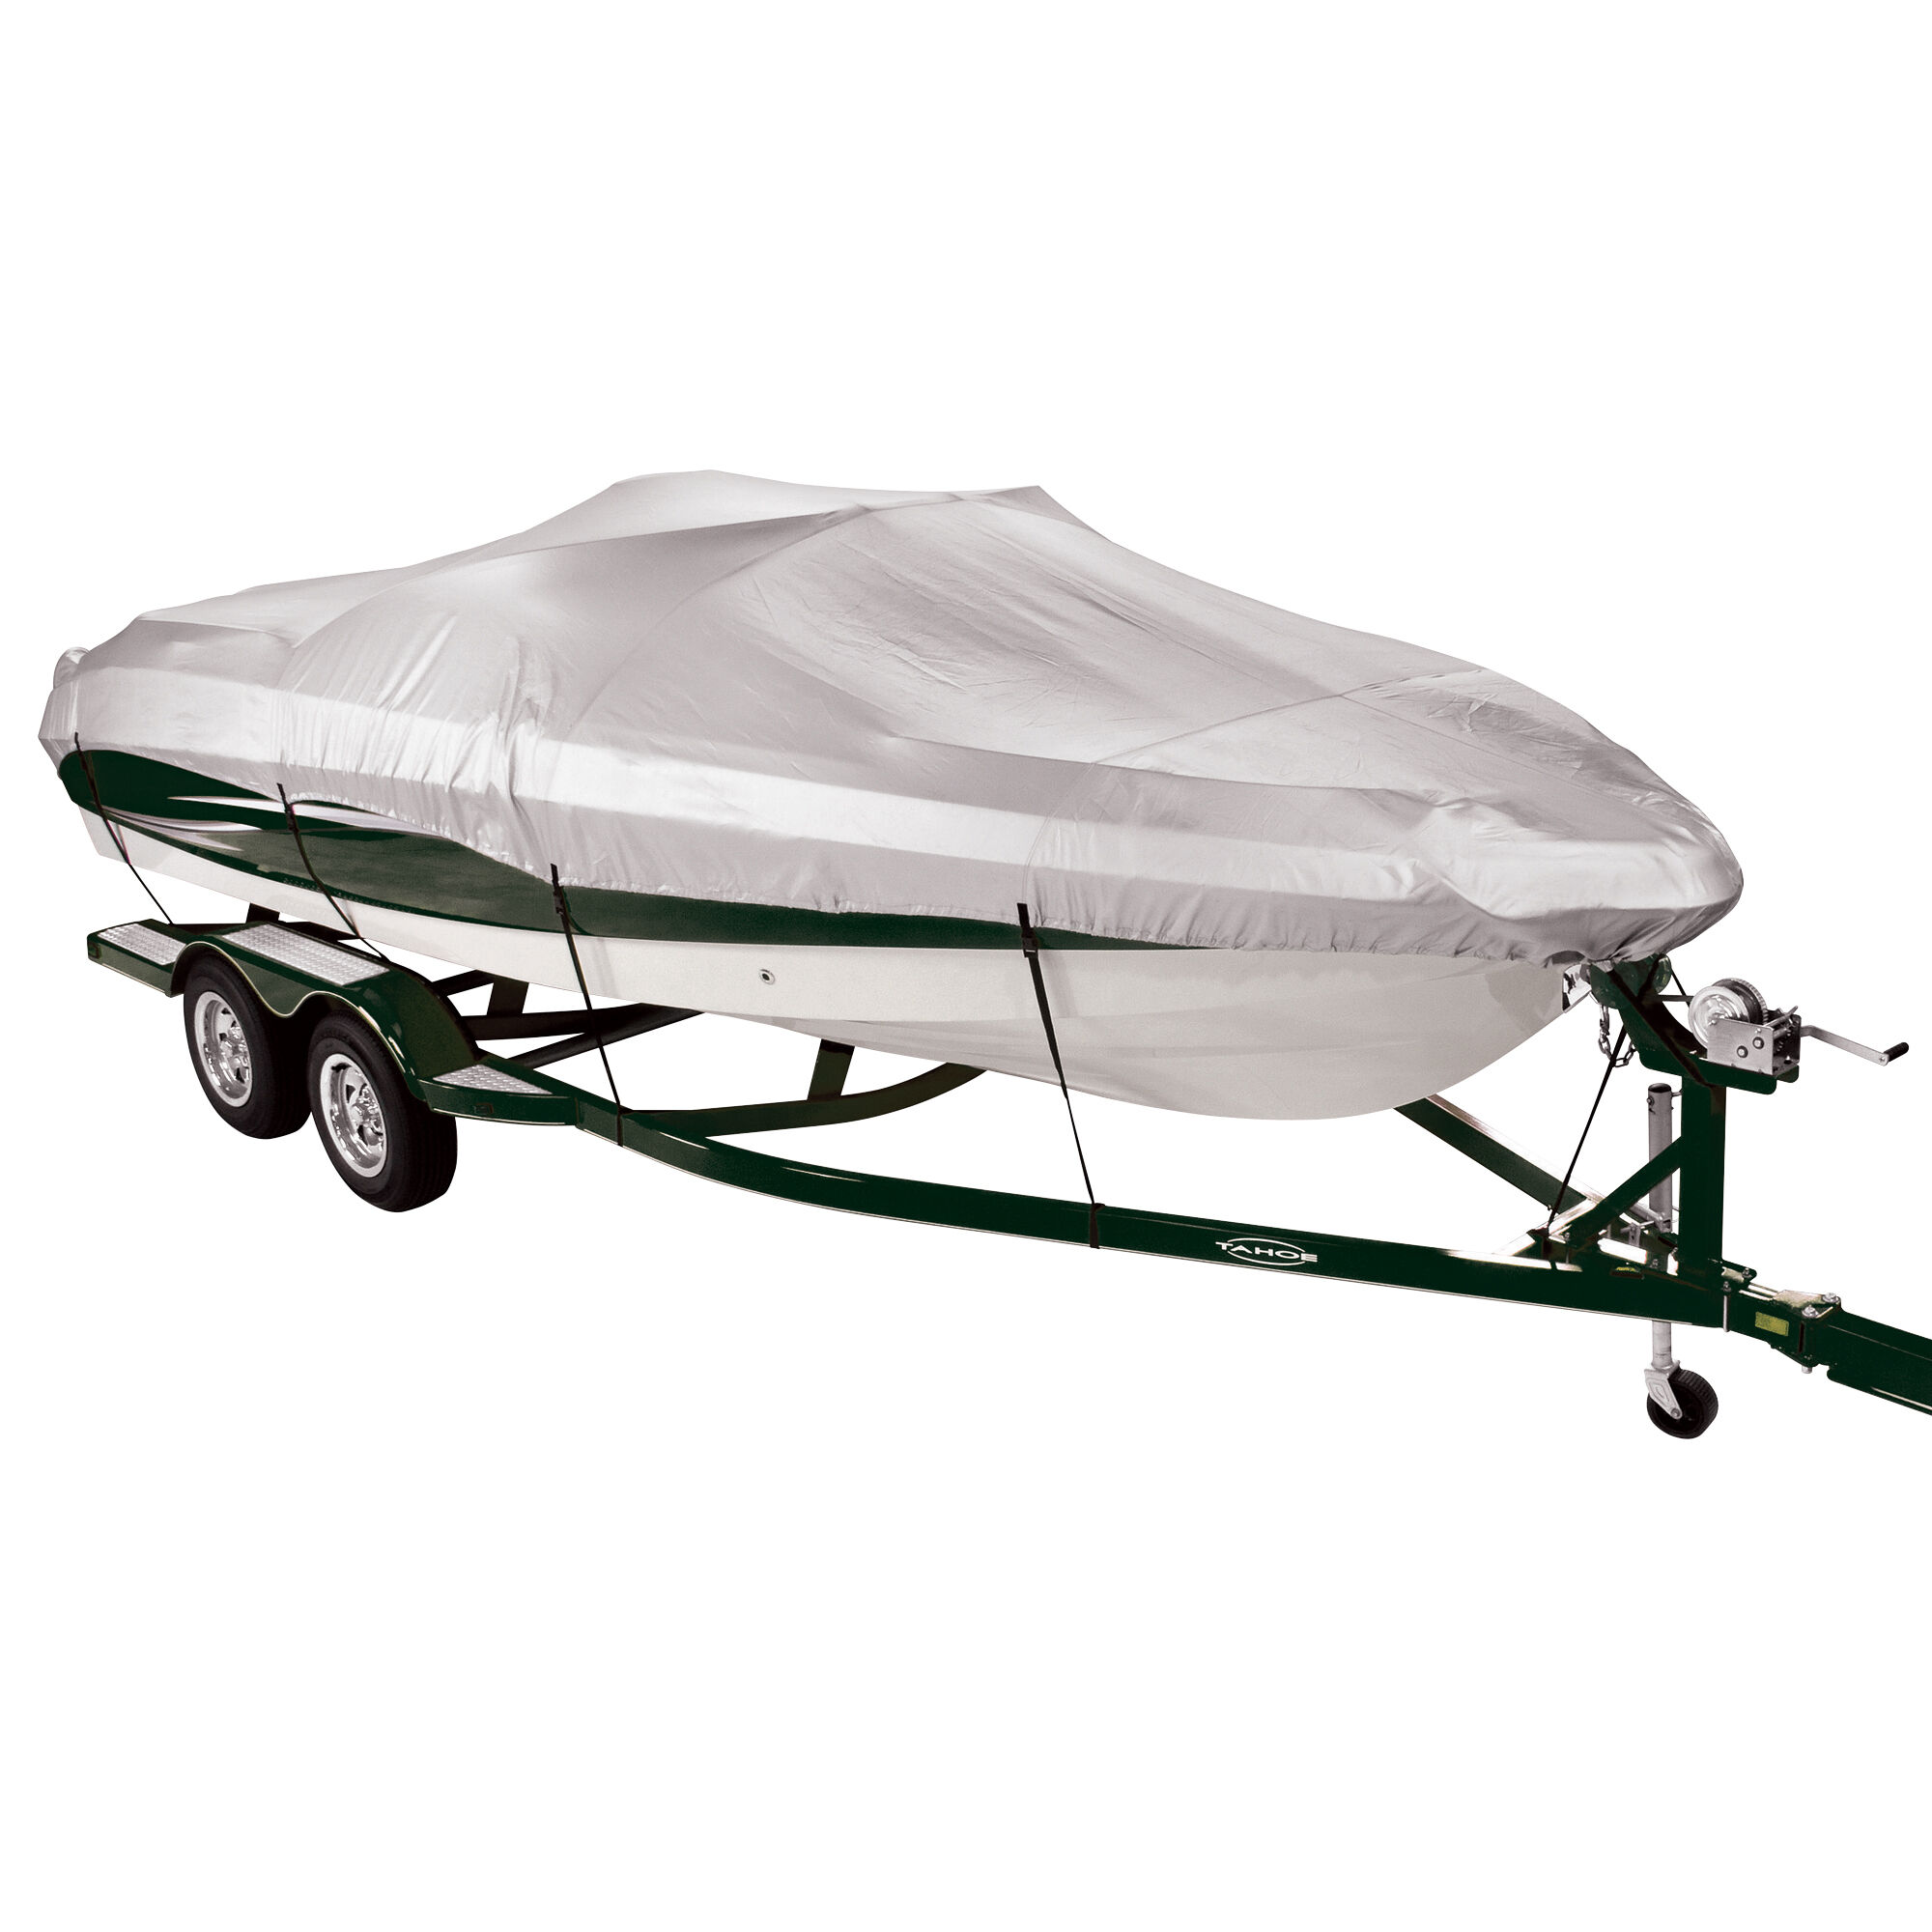 Covermate 150 Mooring and Storage Boat Cover for 12'-14' V-Hull Fishing Boat in Silver